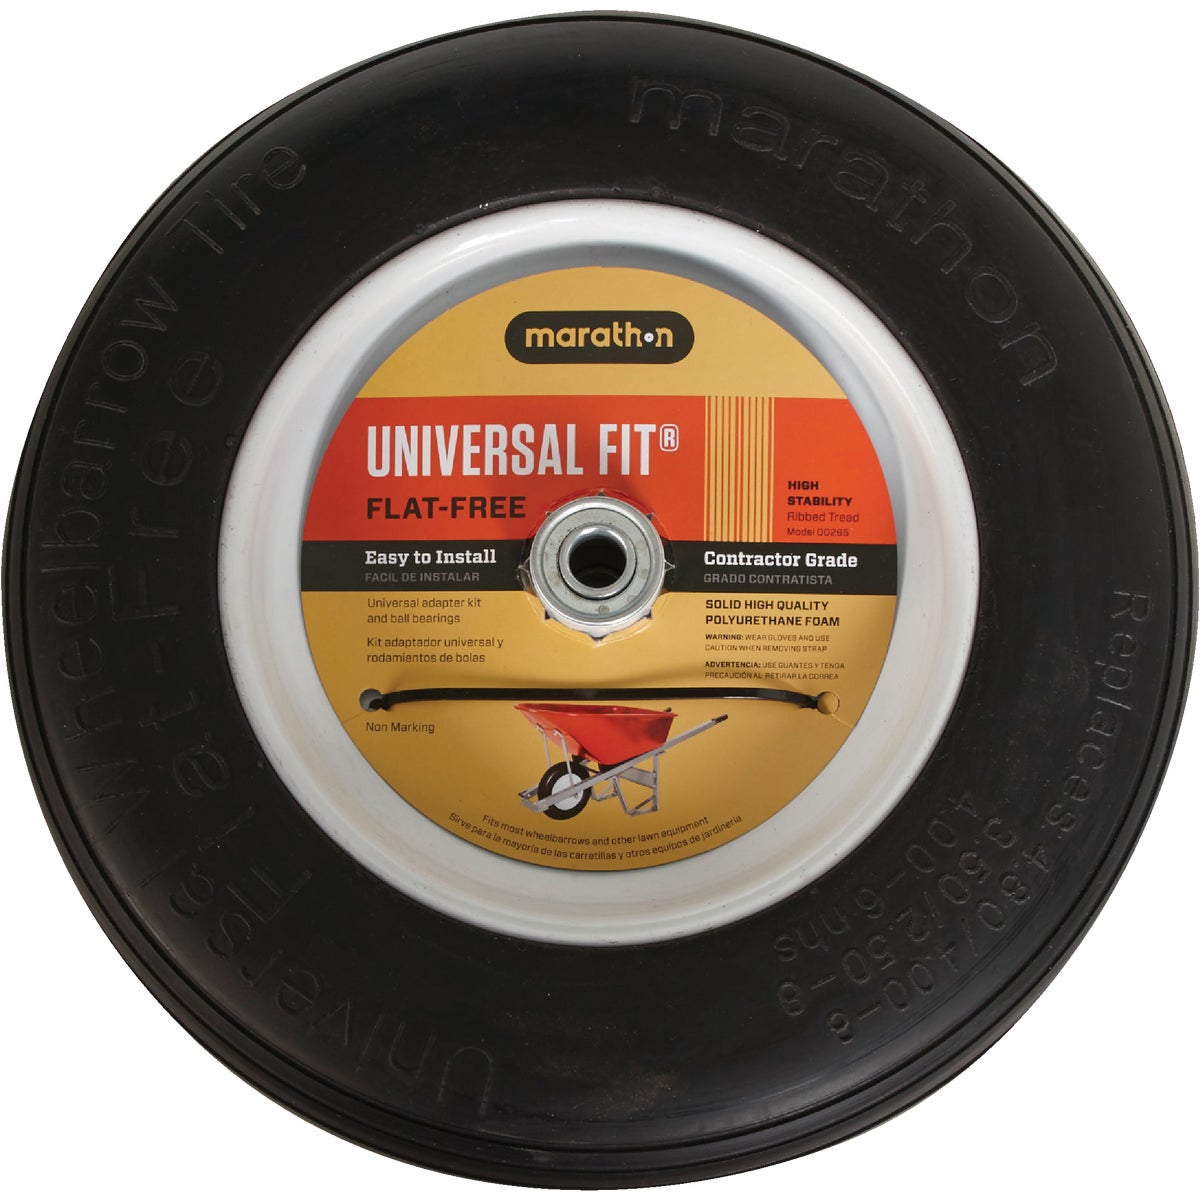 Item 736855, Universal fit polyurethane flat free wheelbarrow tire comes with a 3 In.